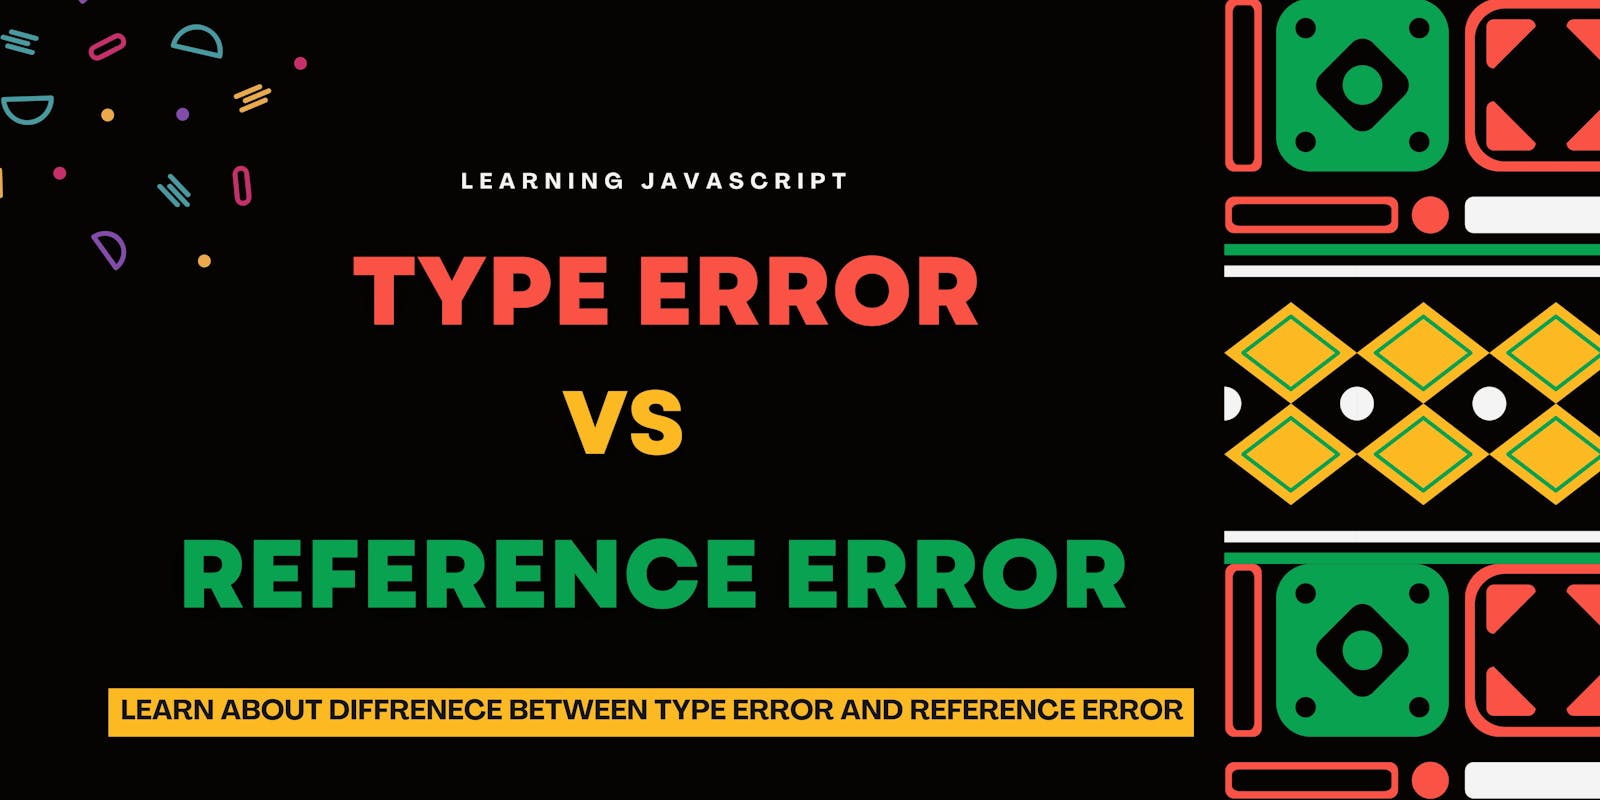 What are Reference Errors and Type Errors in Javascript?